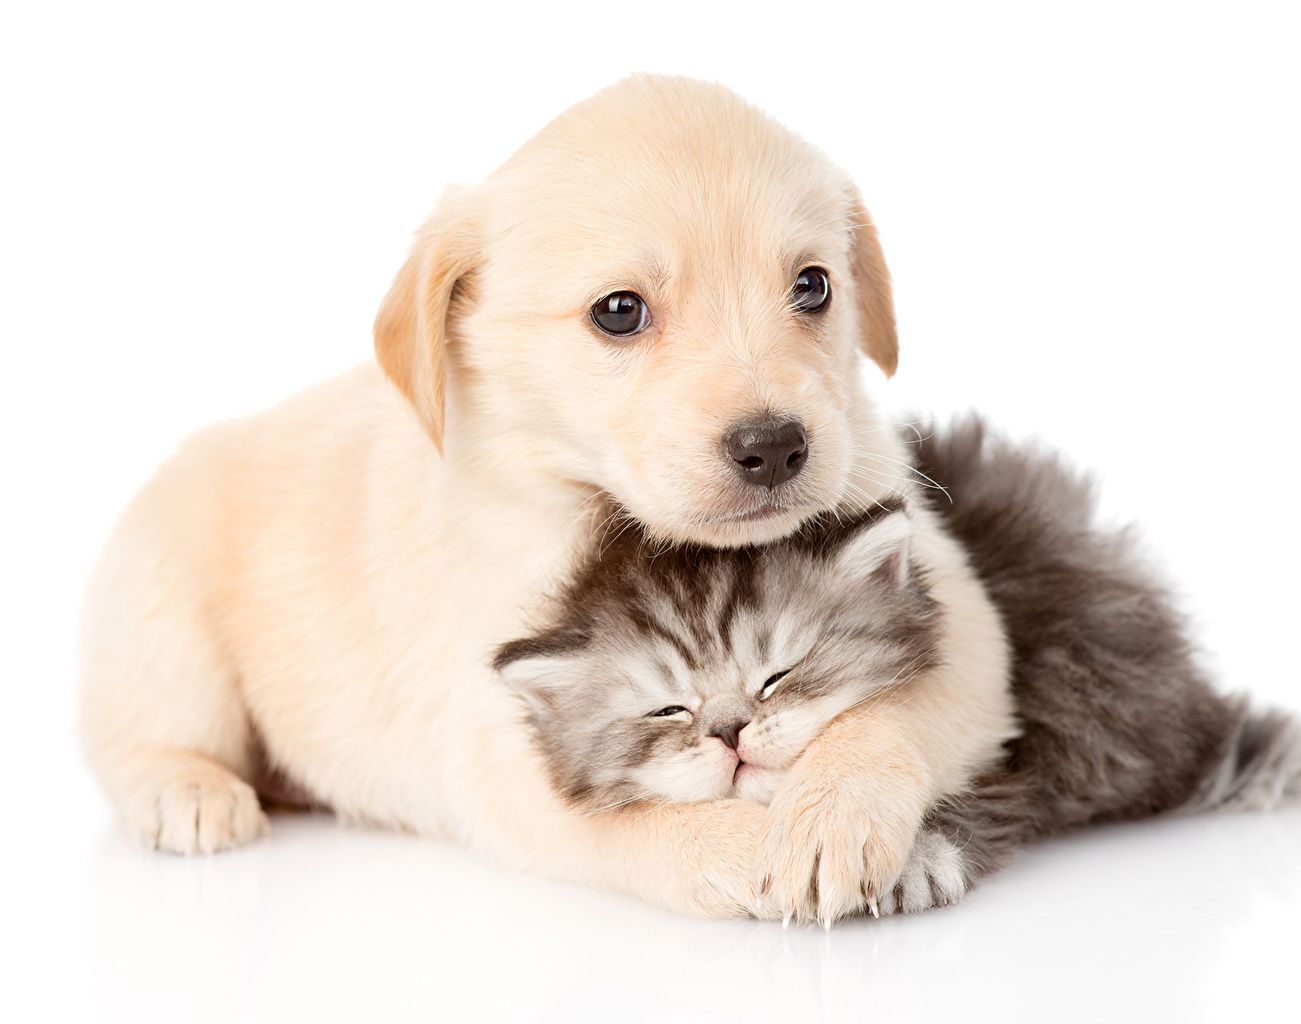 Cats and Dogs Sleeping Wallpapers on